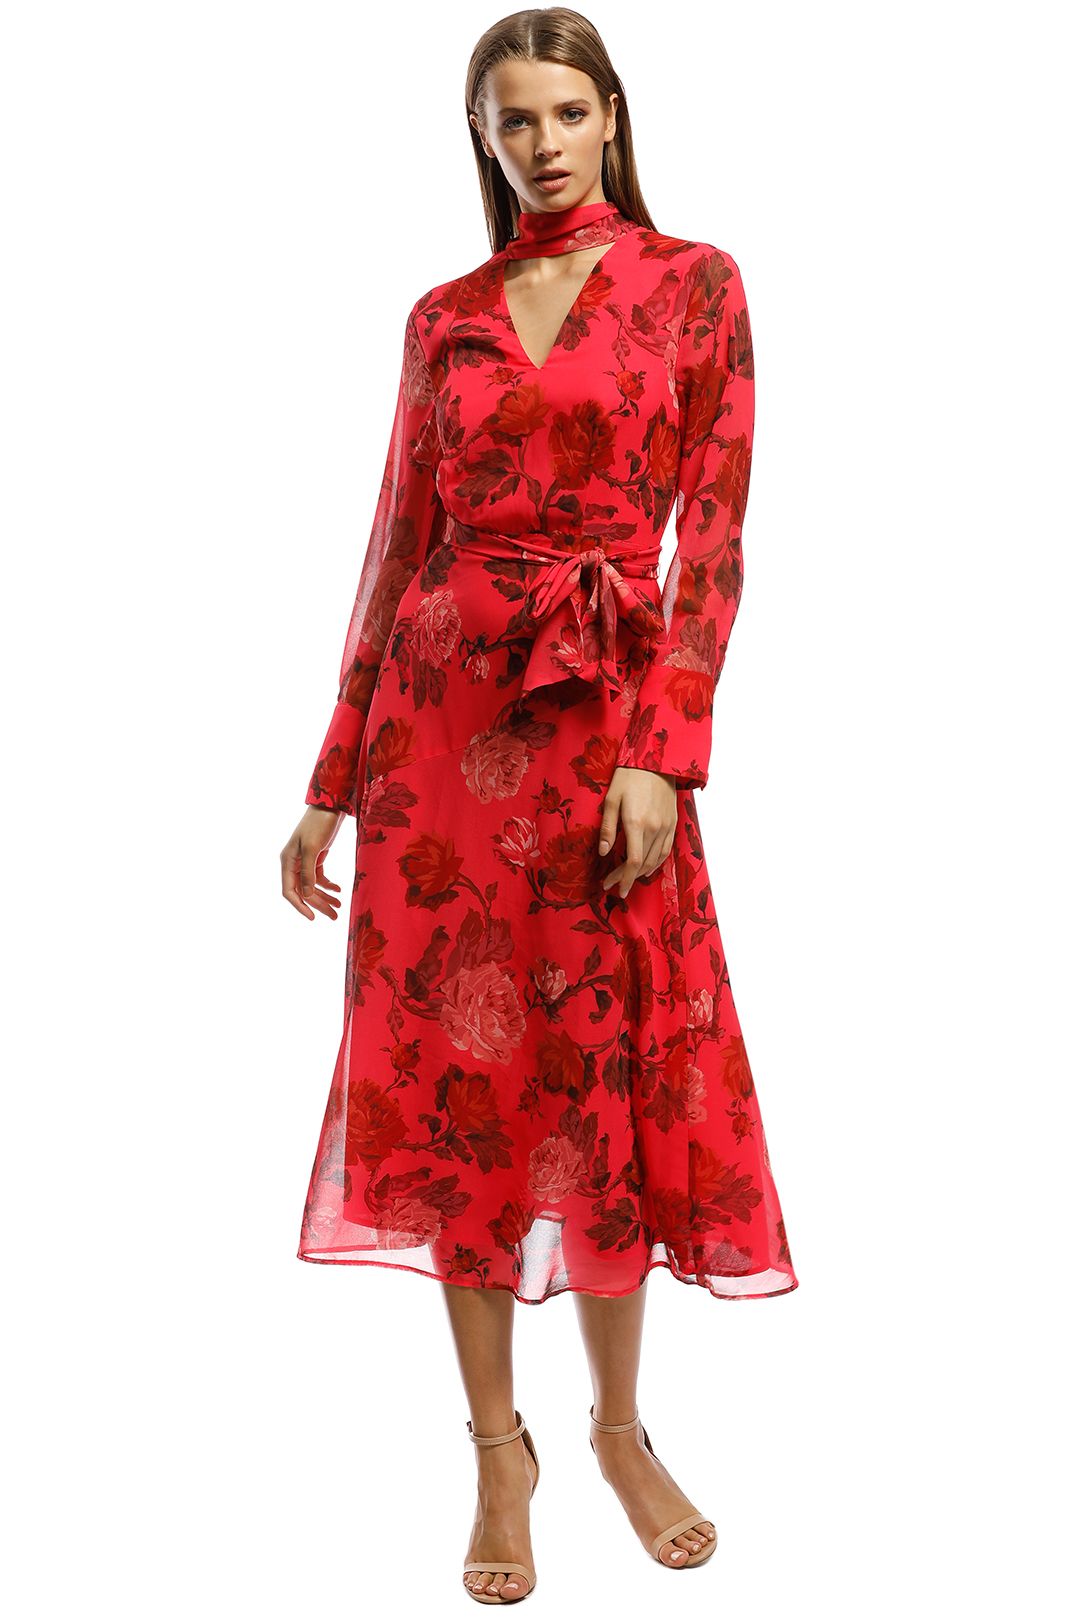 CMEO Collective - Variation LS Midi Dress - Red - Front